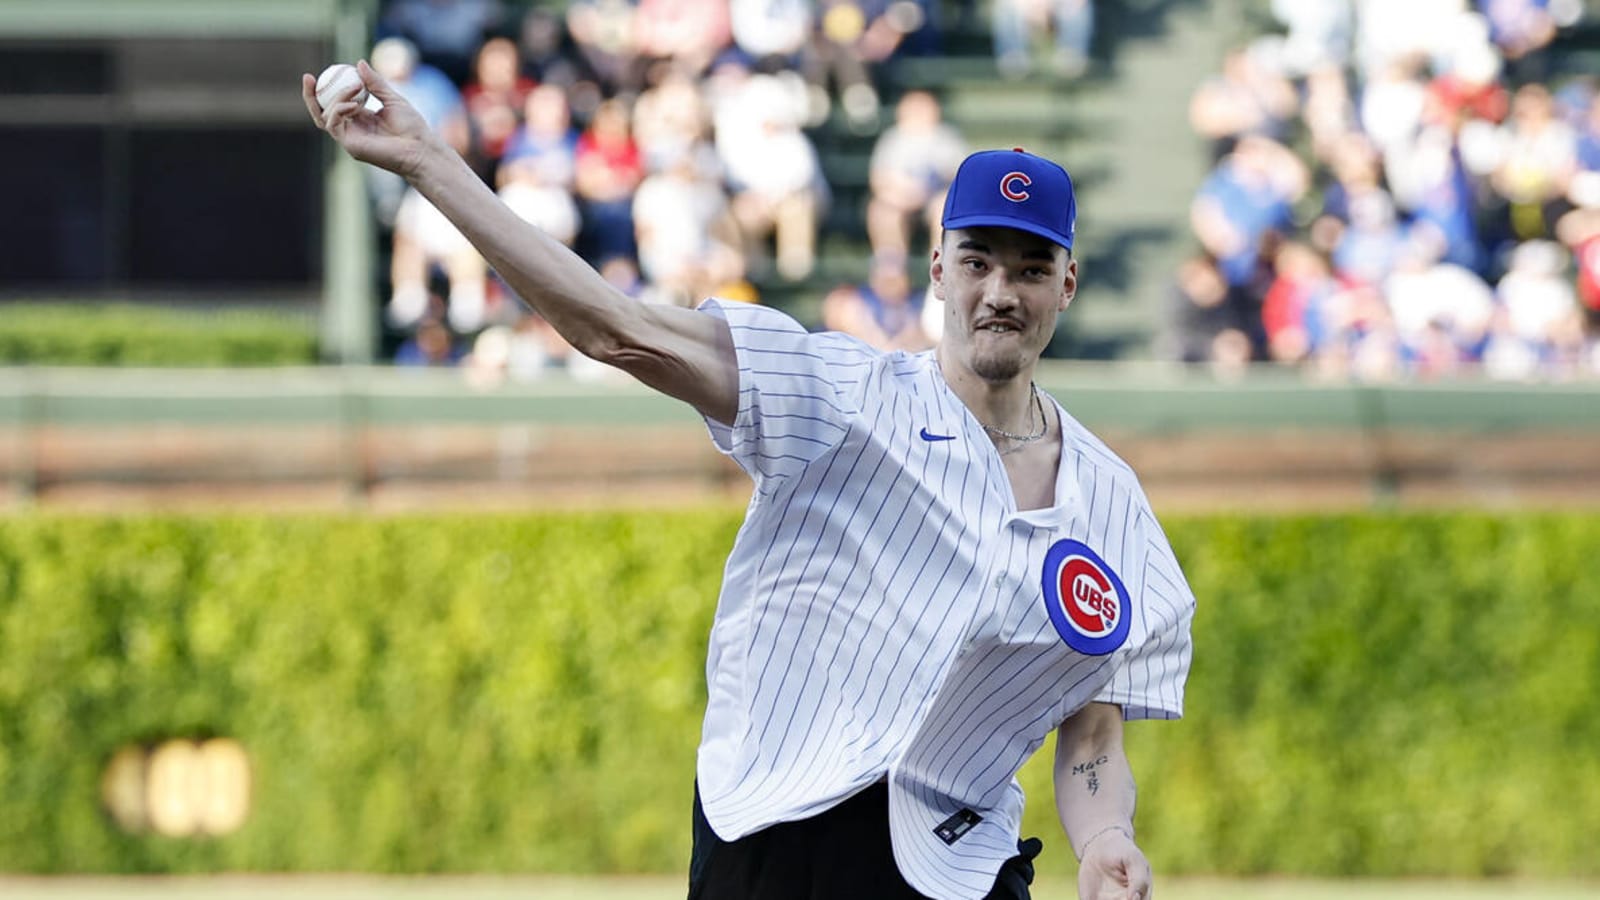 Watch: Zach Edey bombs his first pitch before Cubs game